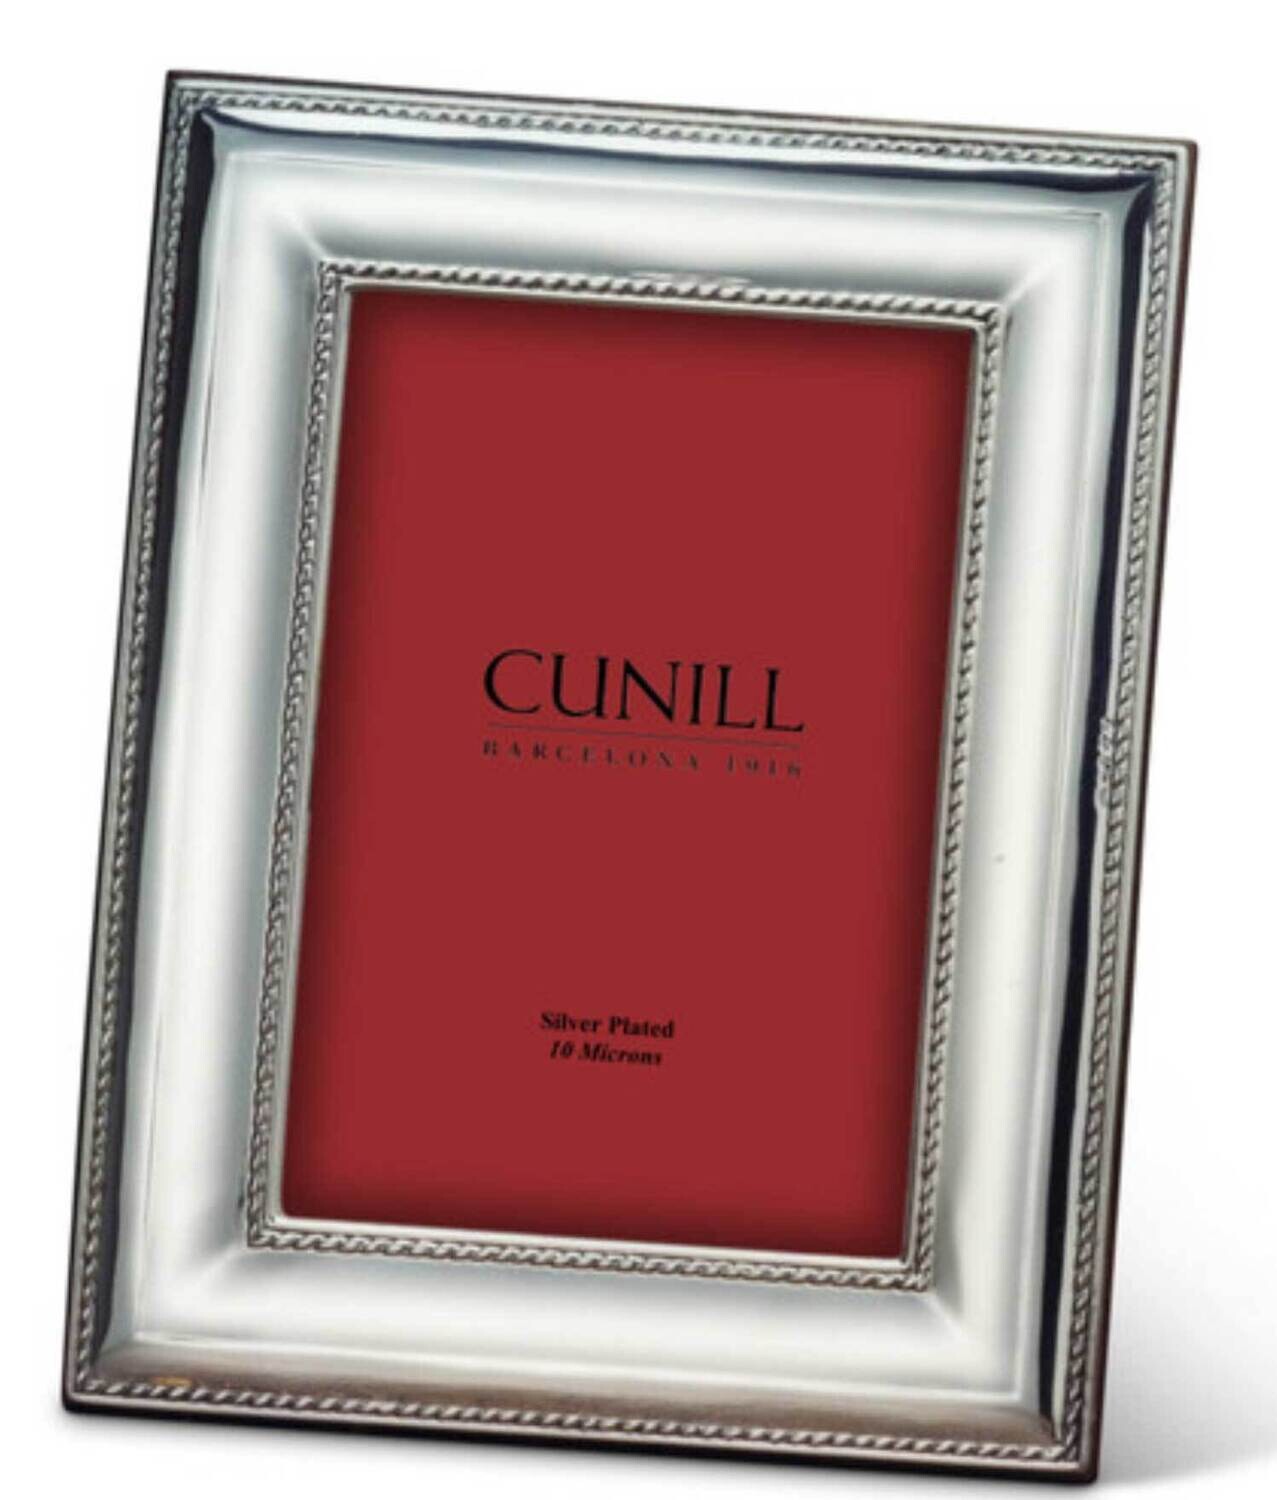 Cunill Cords 4x6 Inch Picture Frame Silverplated 52946